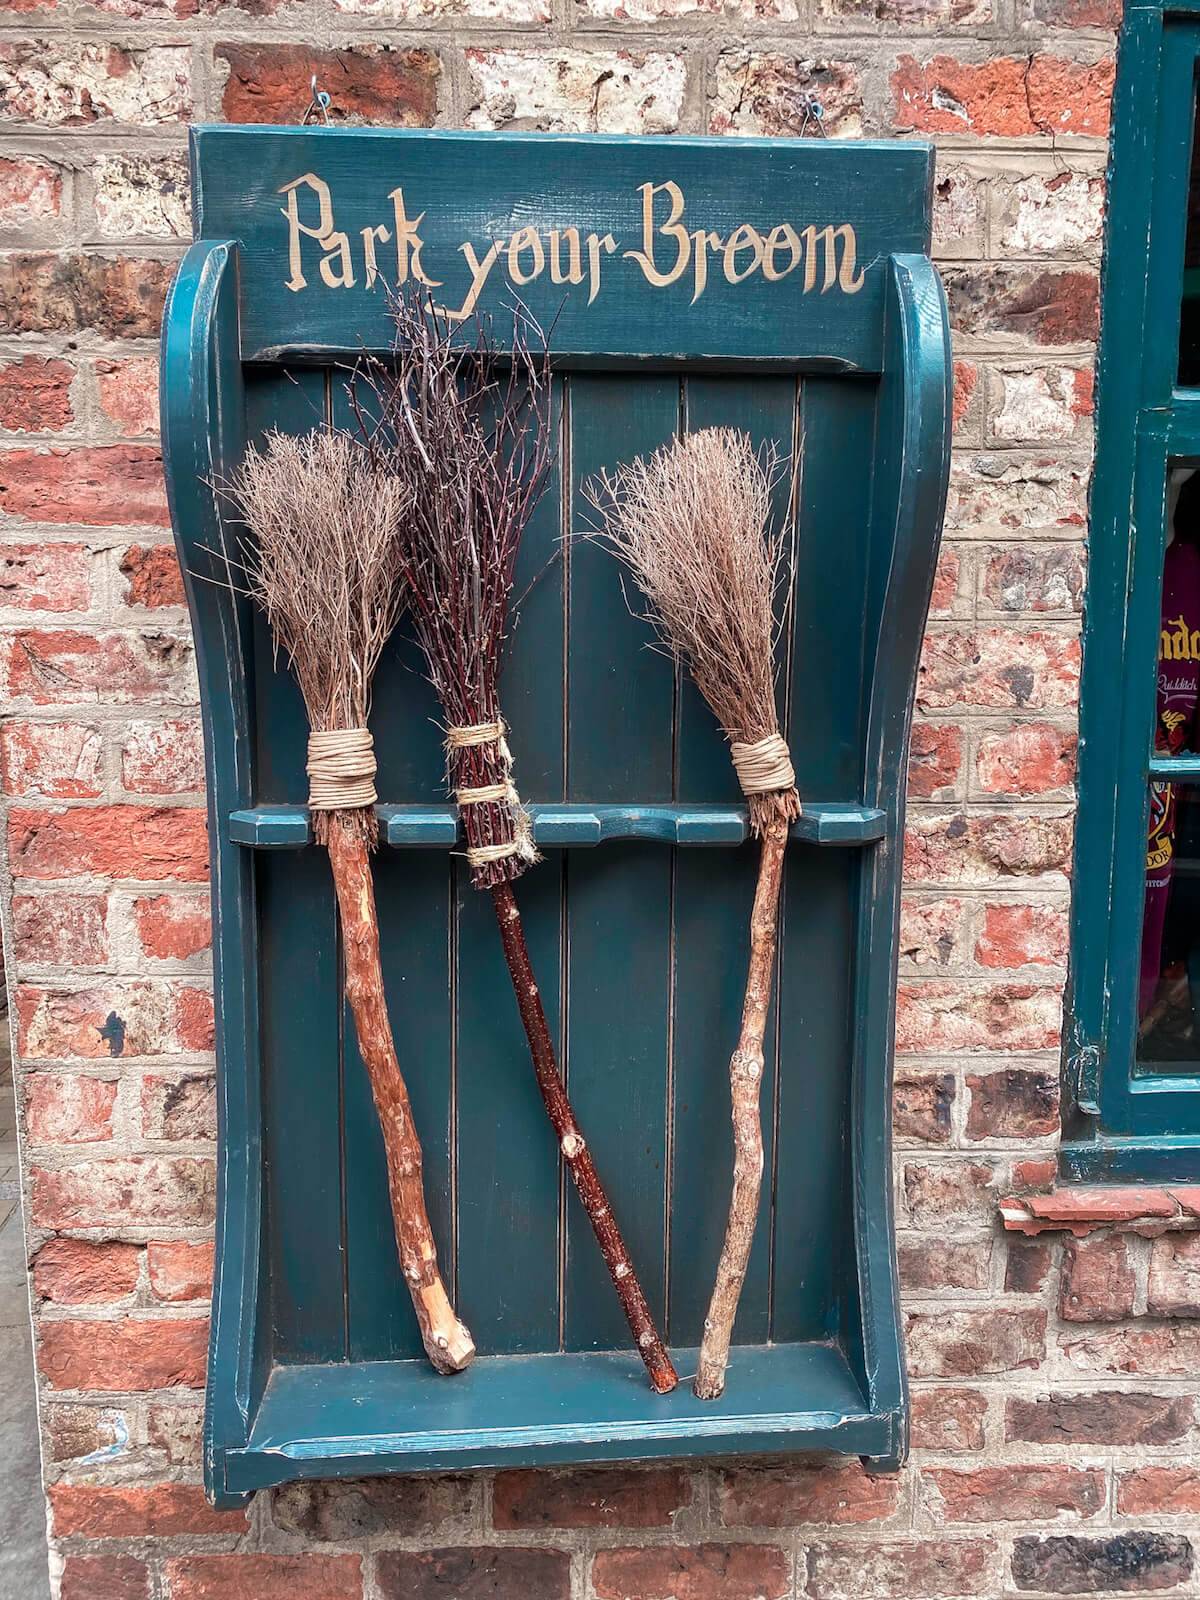 Harry Potter places in York